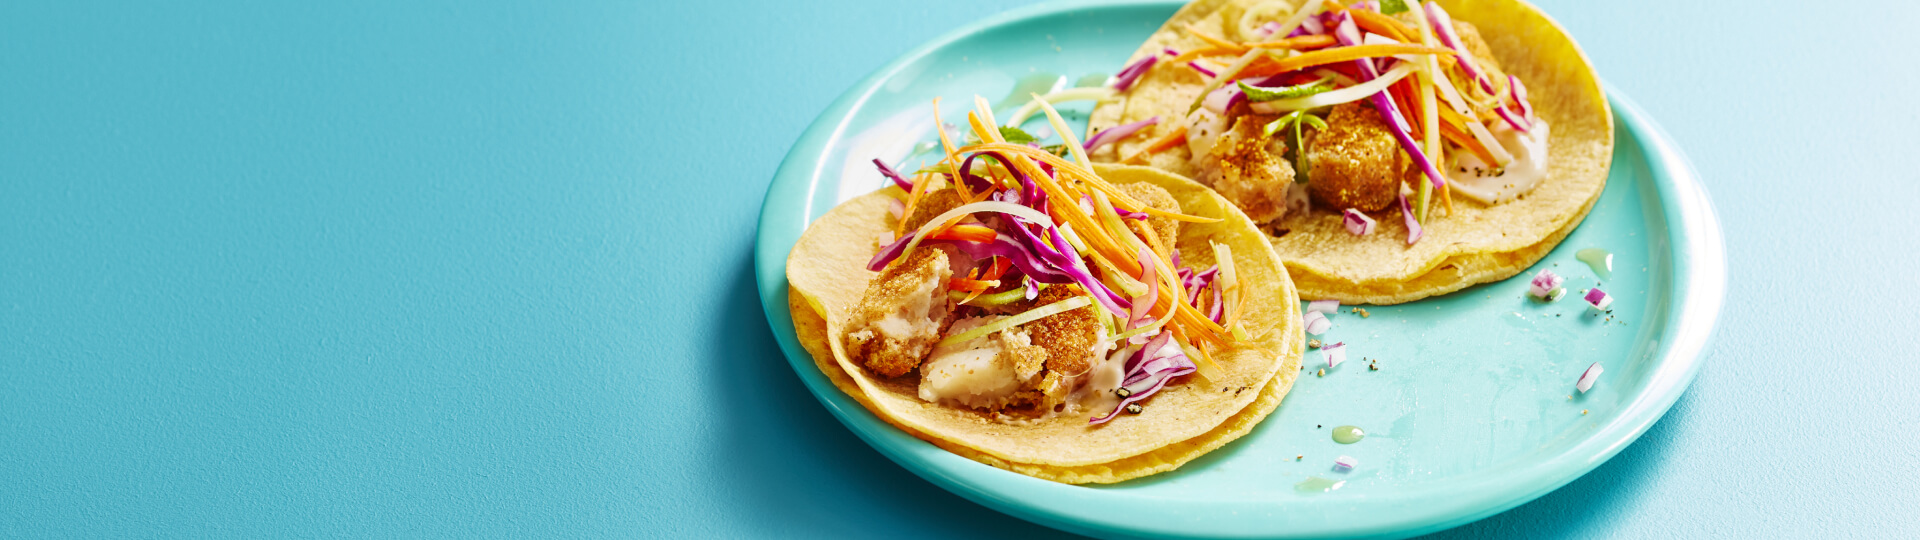 Aqua blue background with white plate topped with two fish tacos with cabbage and carrot coleslaw.